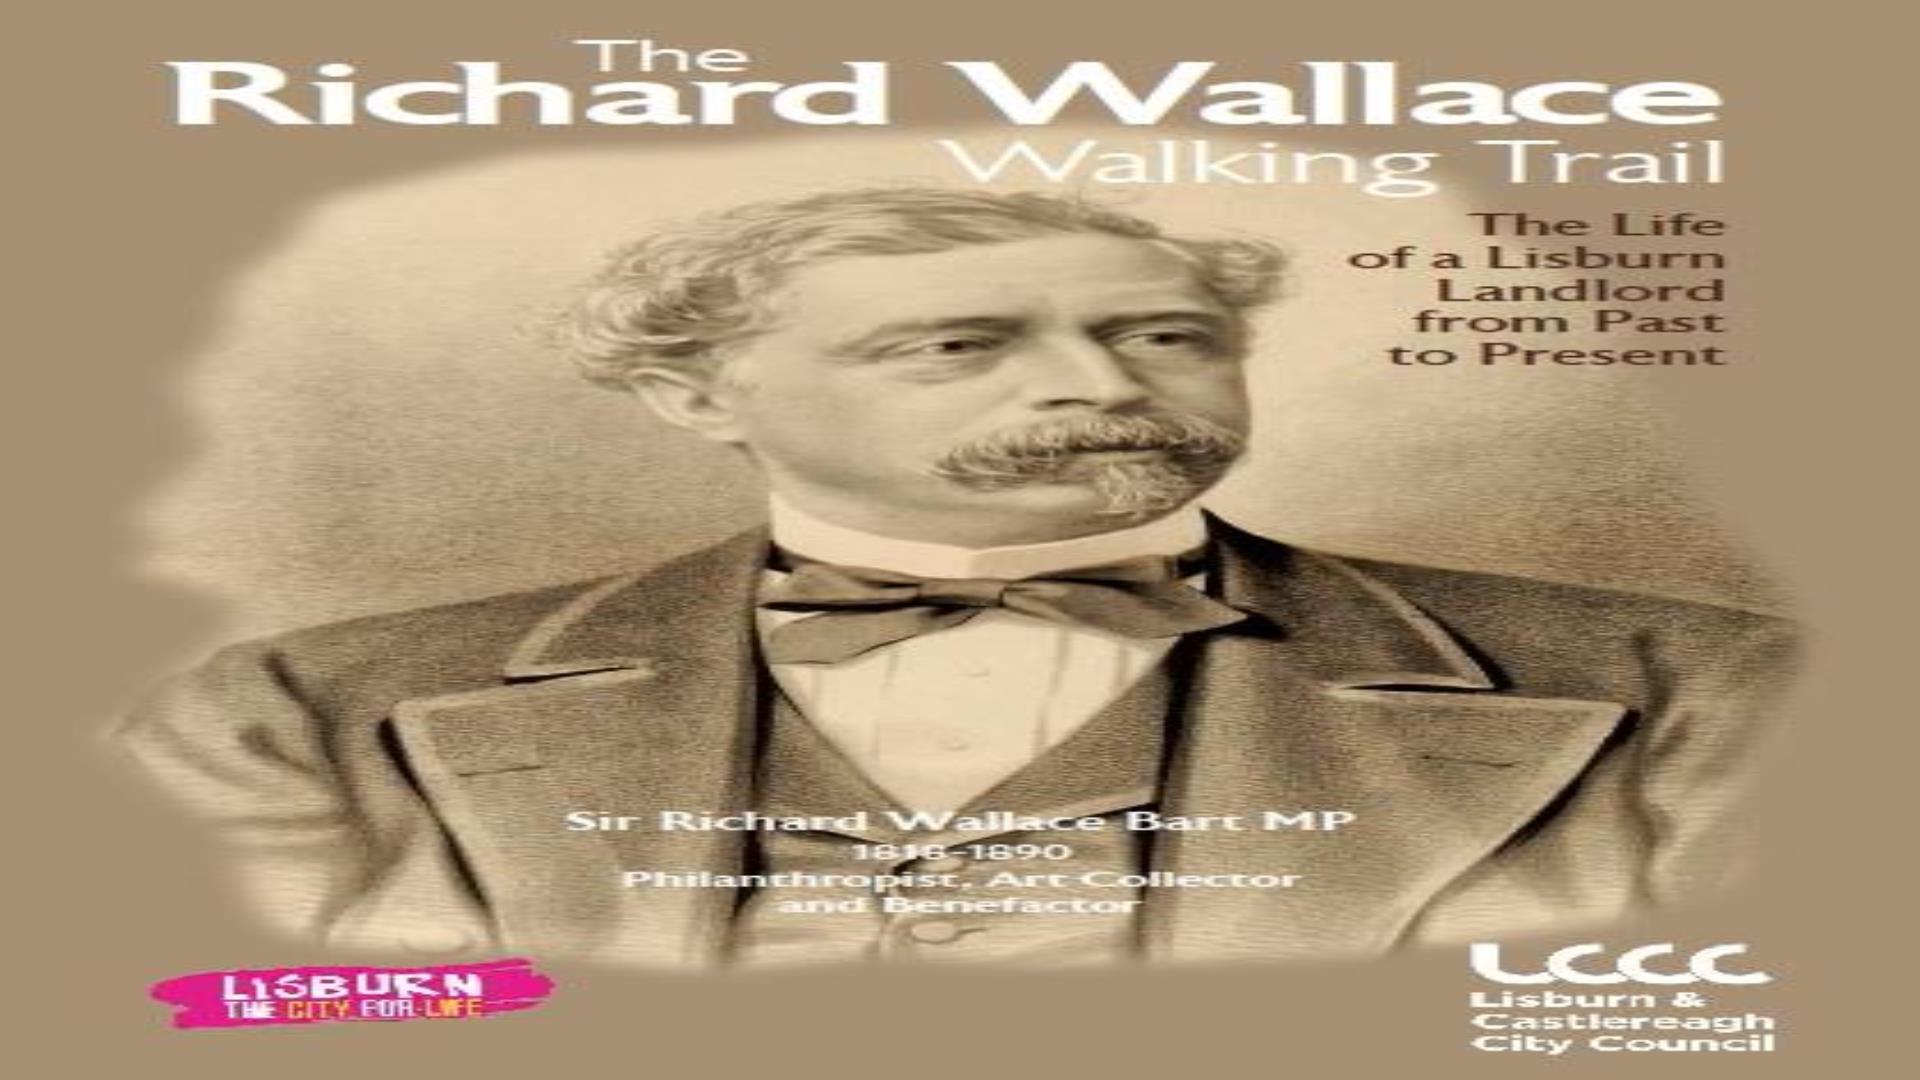 Image is of The Richard Wallace Walking Trail brochure